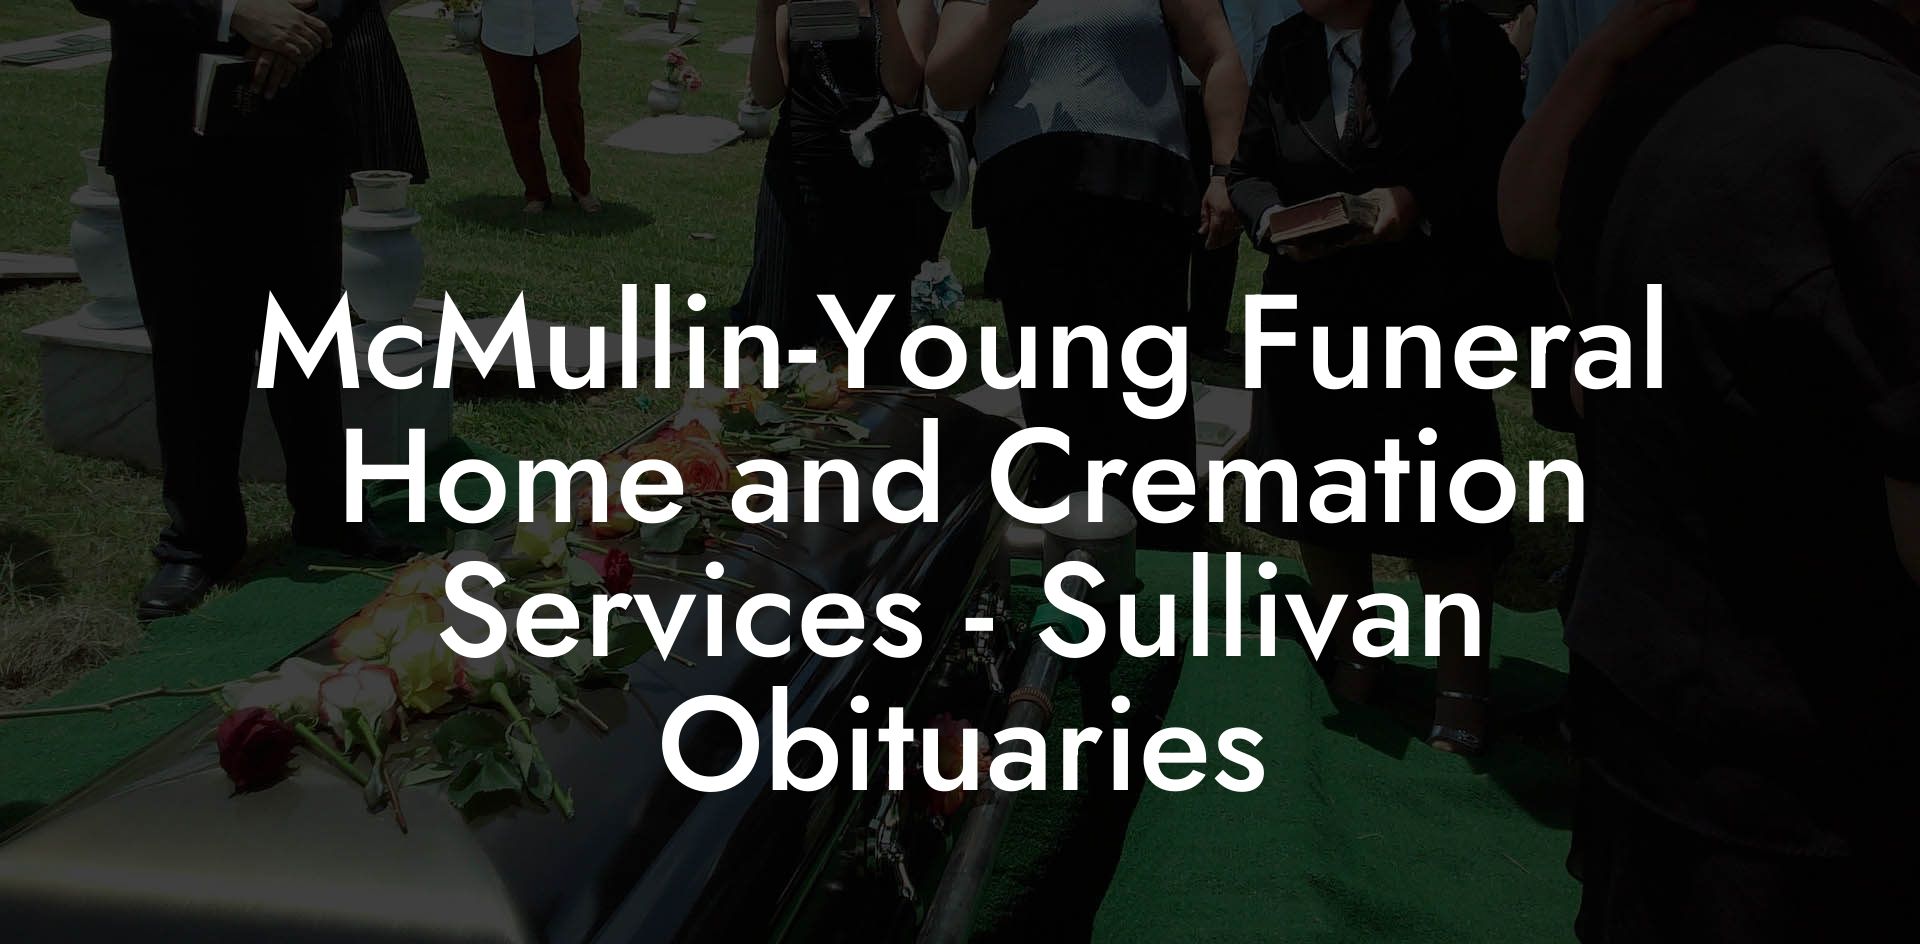 McMullin-Young Funeral Home and Cremation Services - Sullivan Obituaries